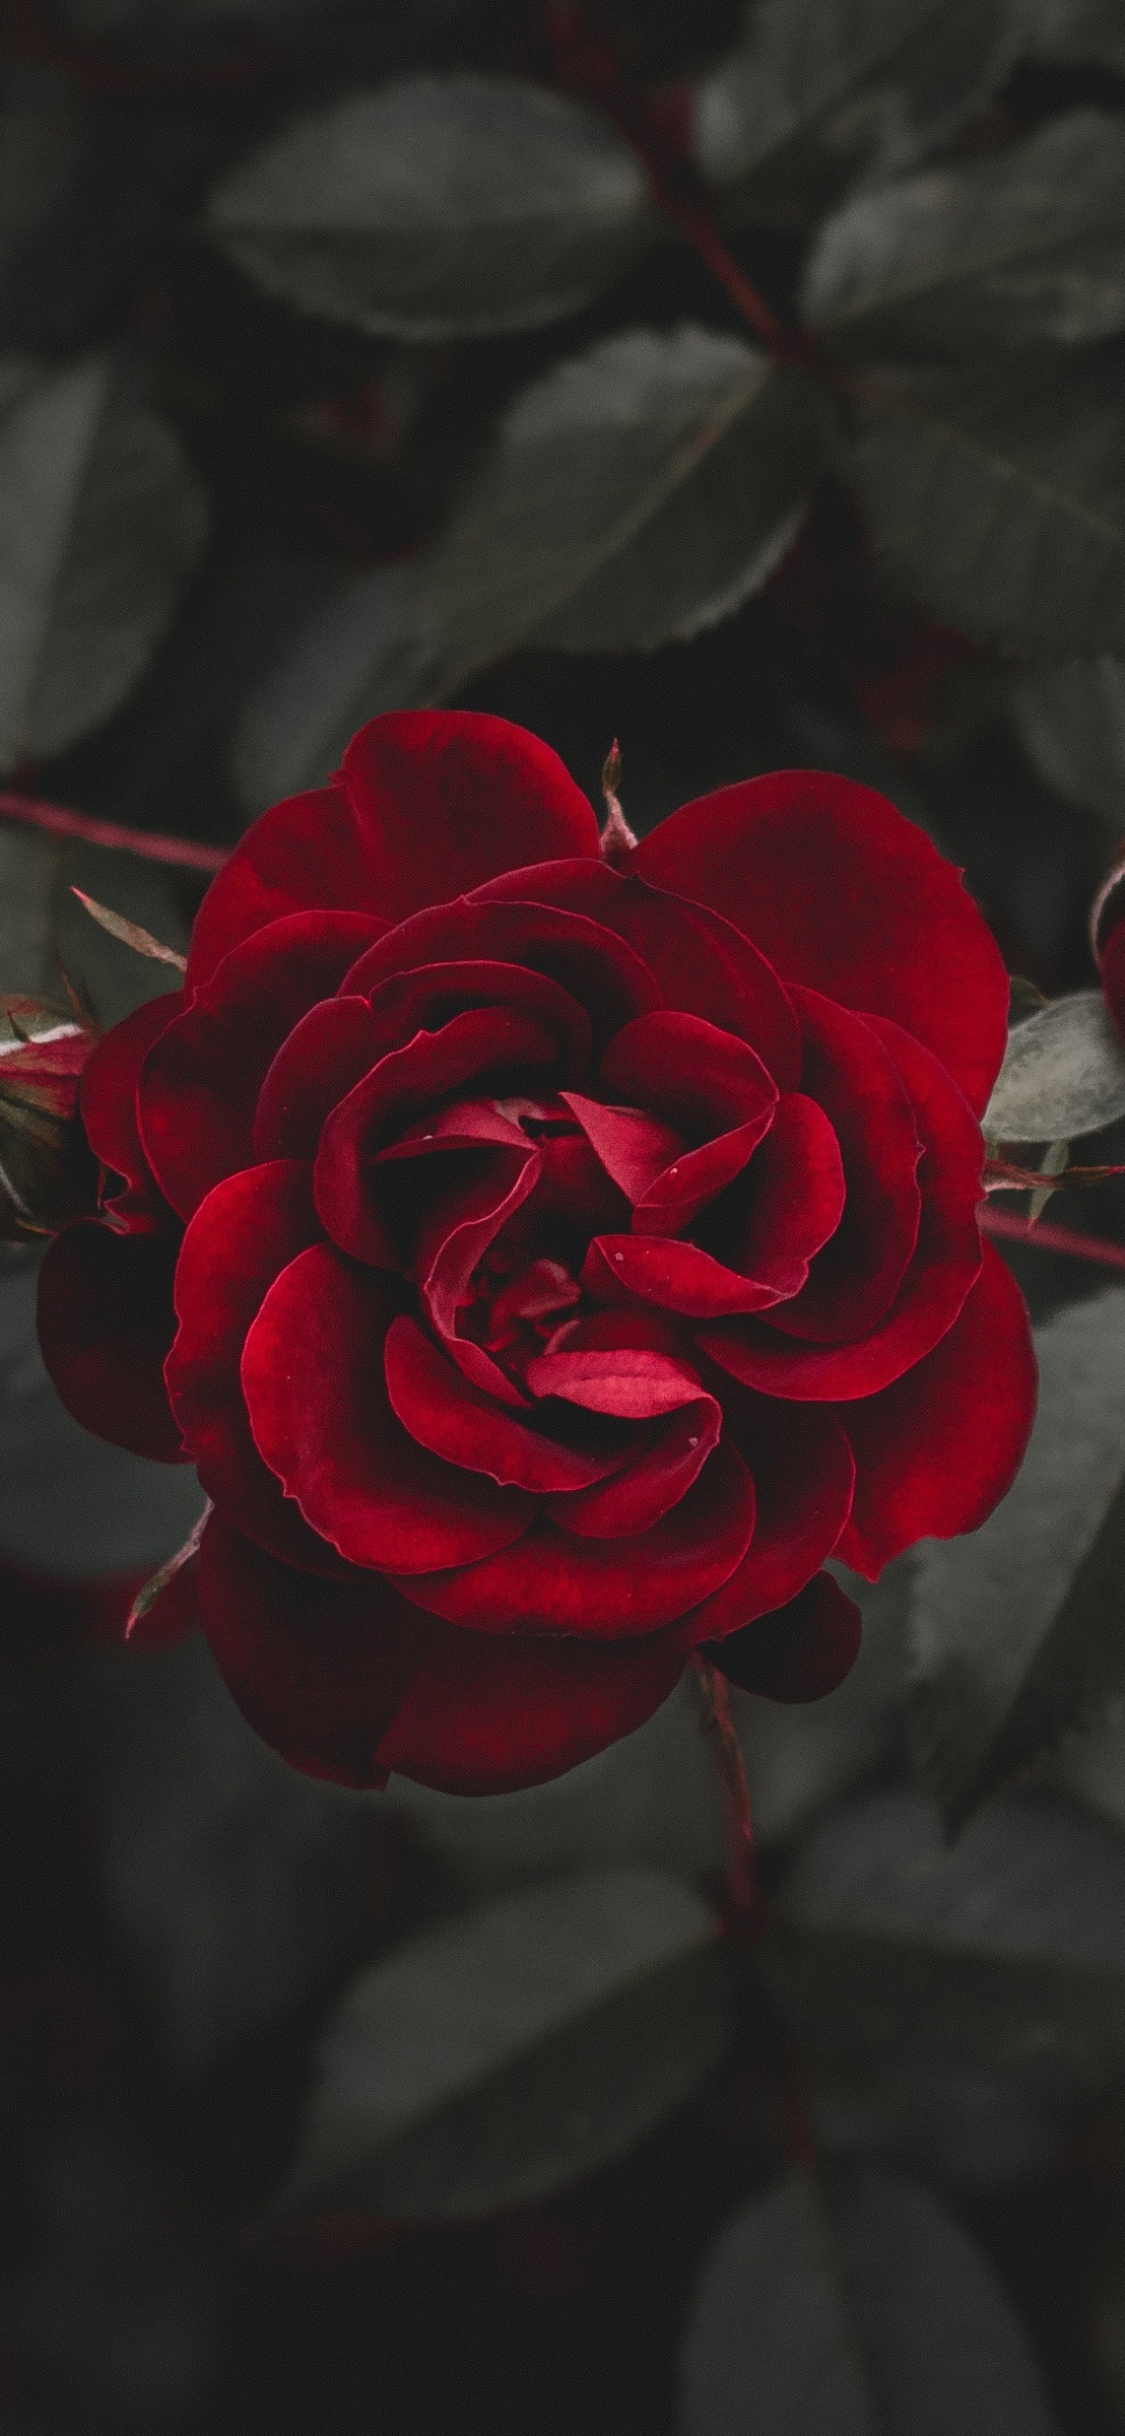 Red roses are beauty